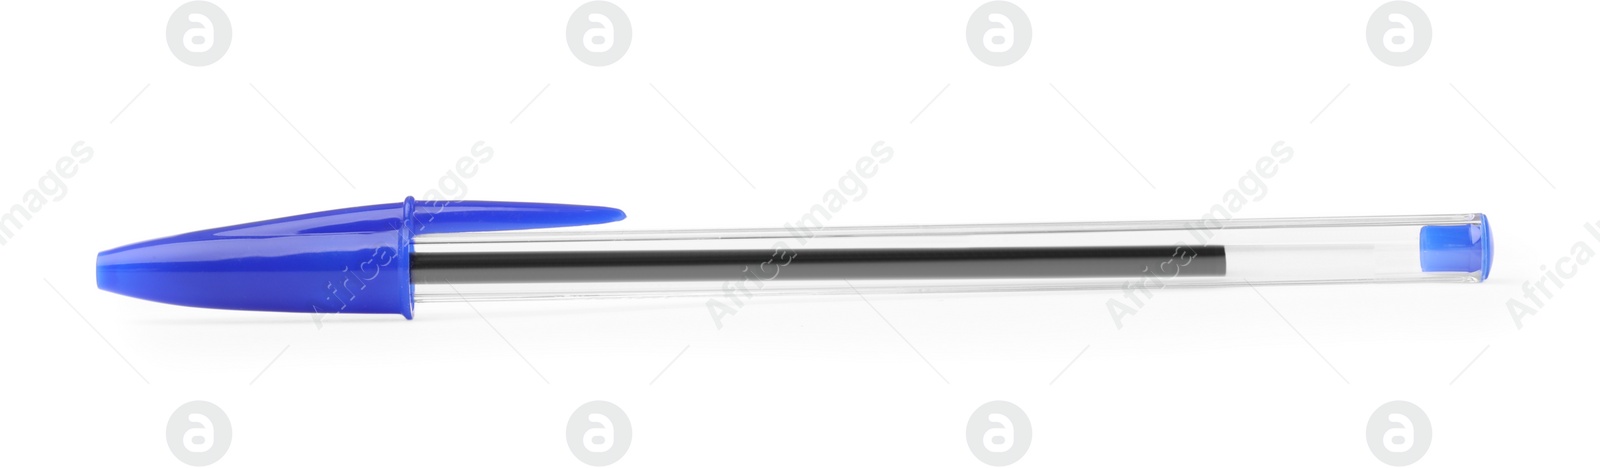 Photo of New blue plastic pen isolated on white